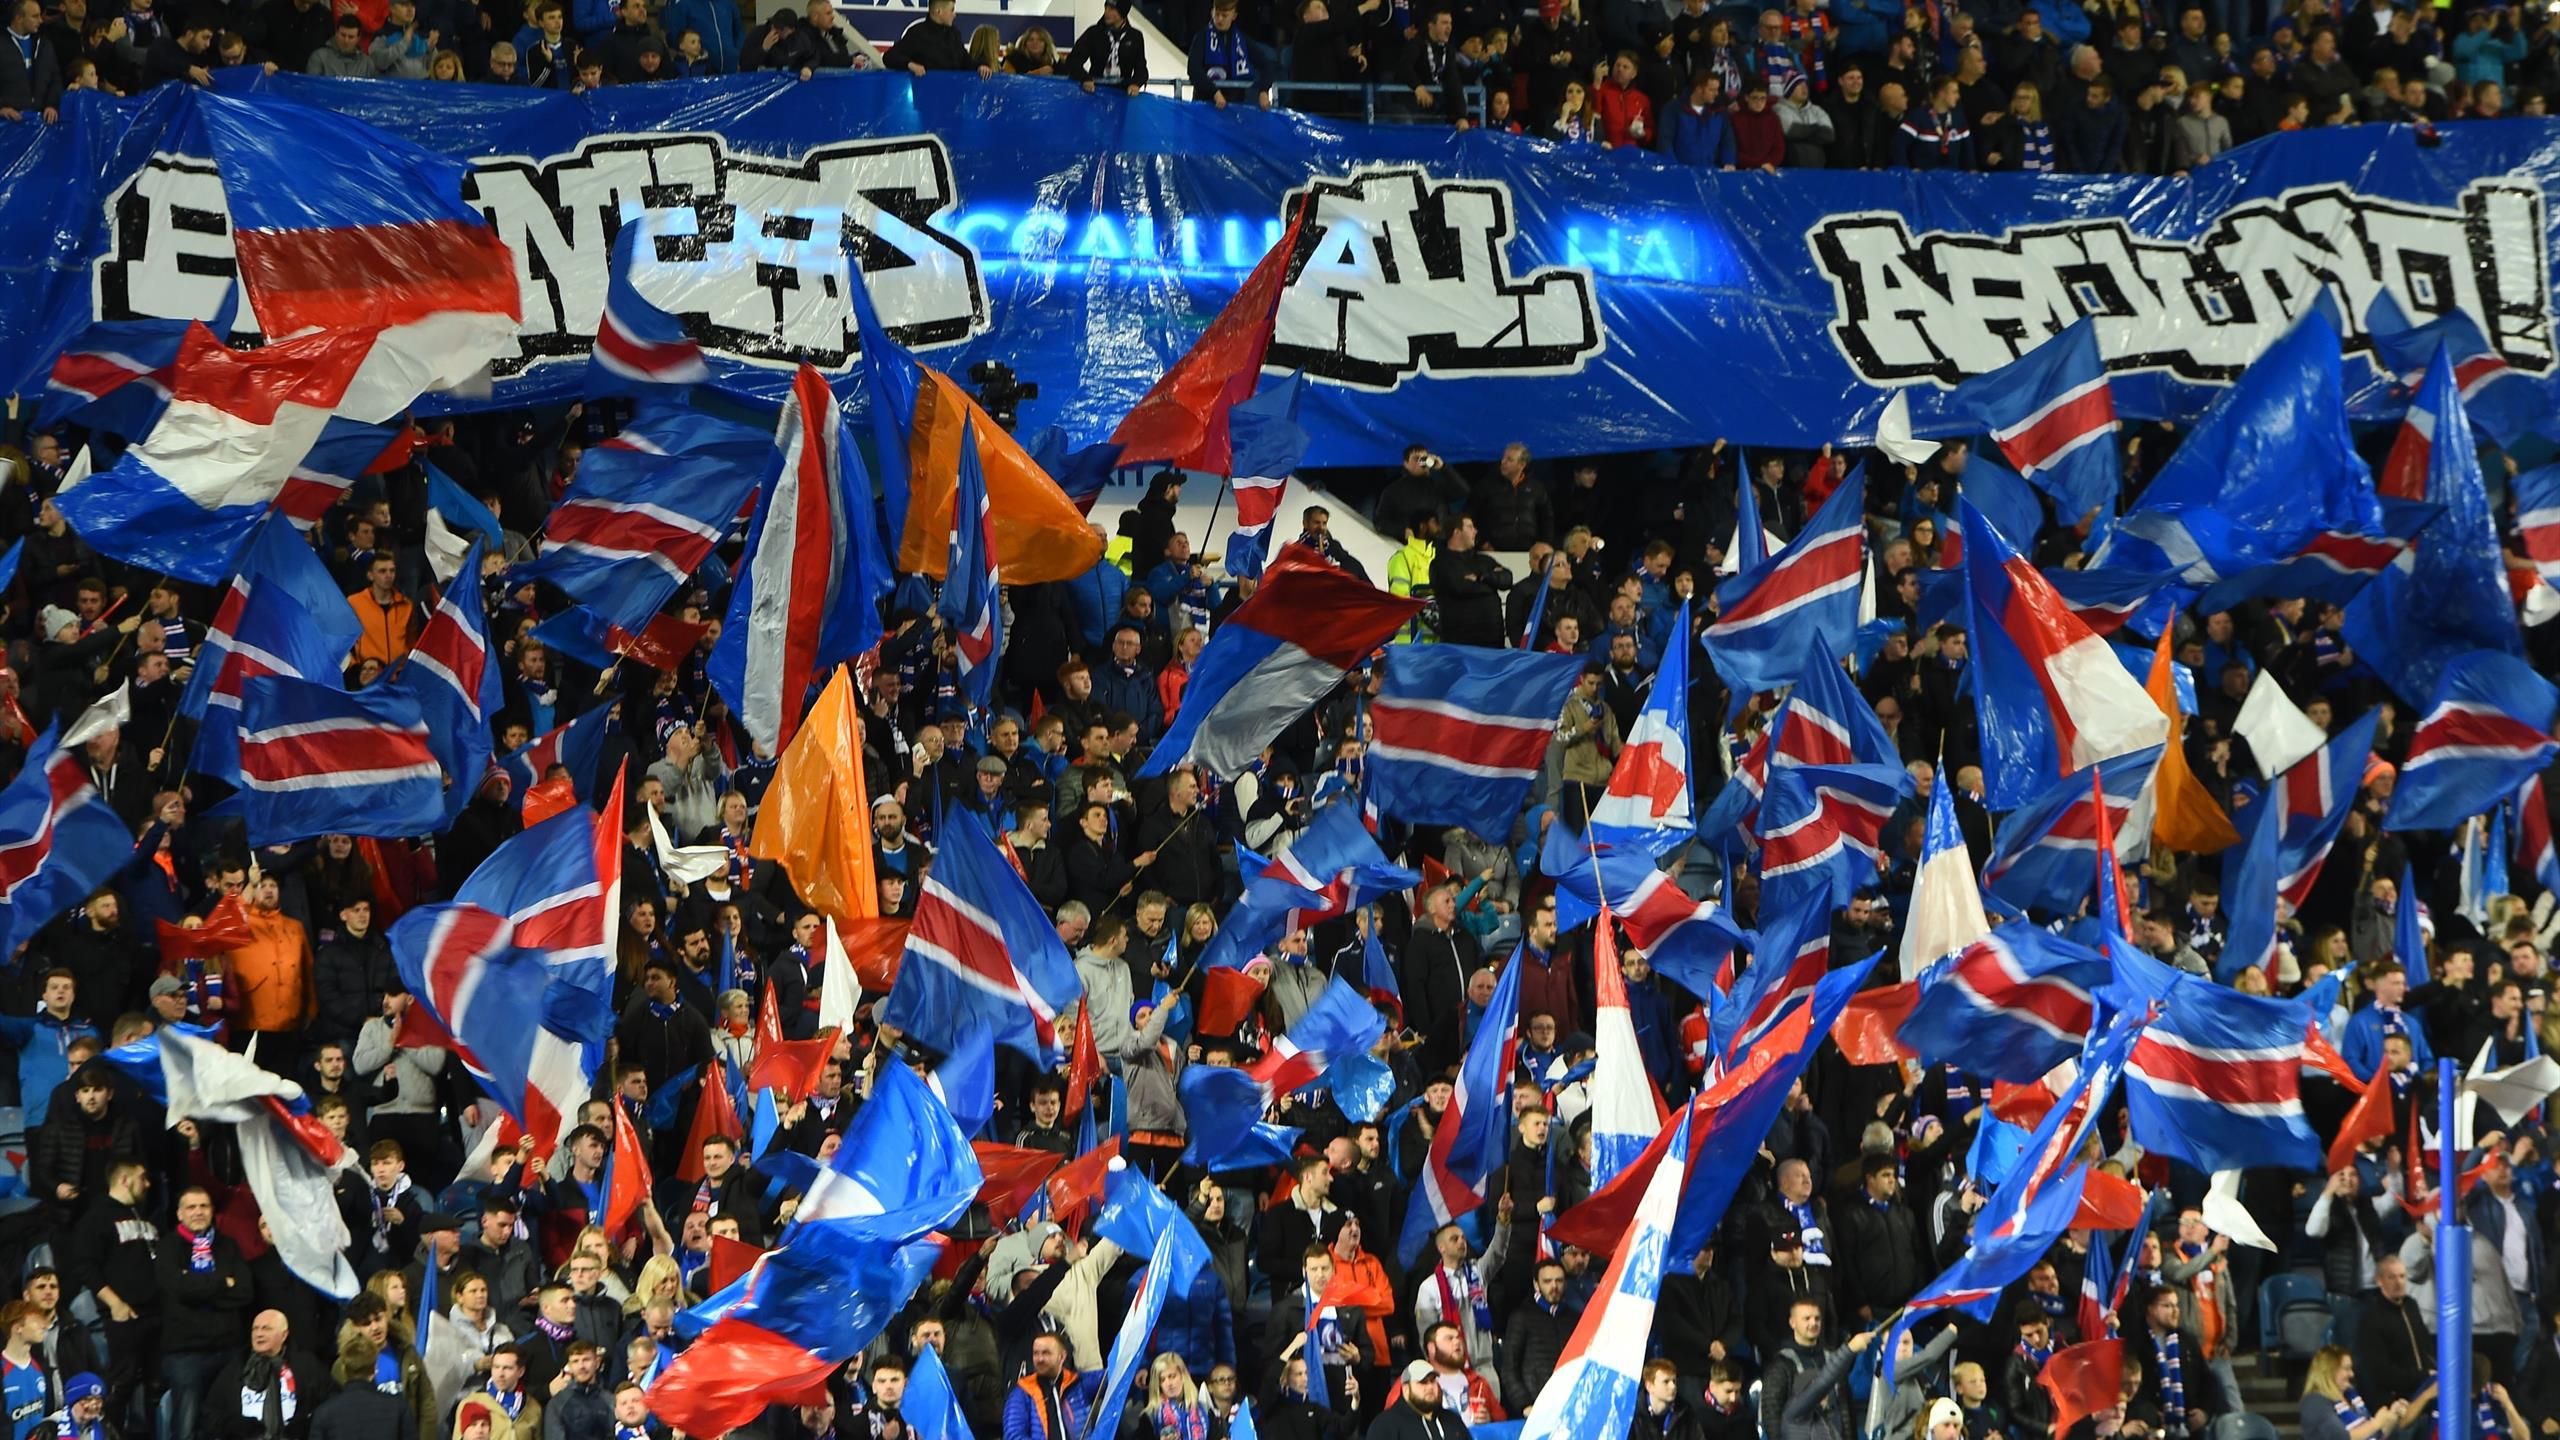 Rangers punished for sectarian chants with Ibrox part-closure, Rangers